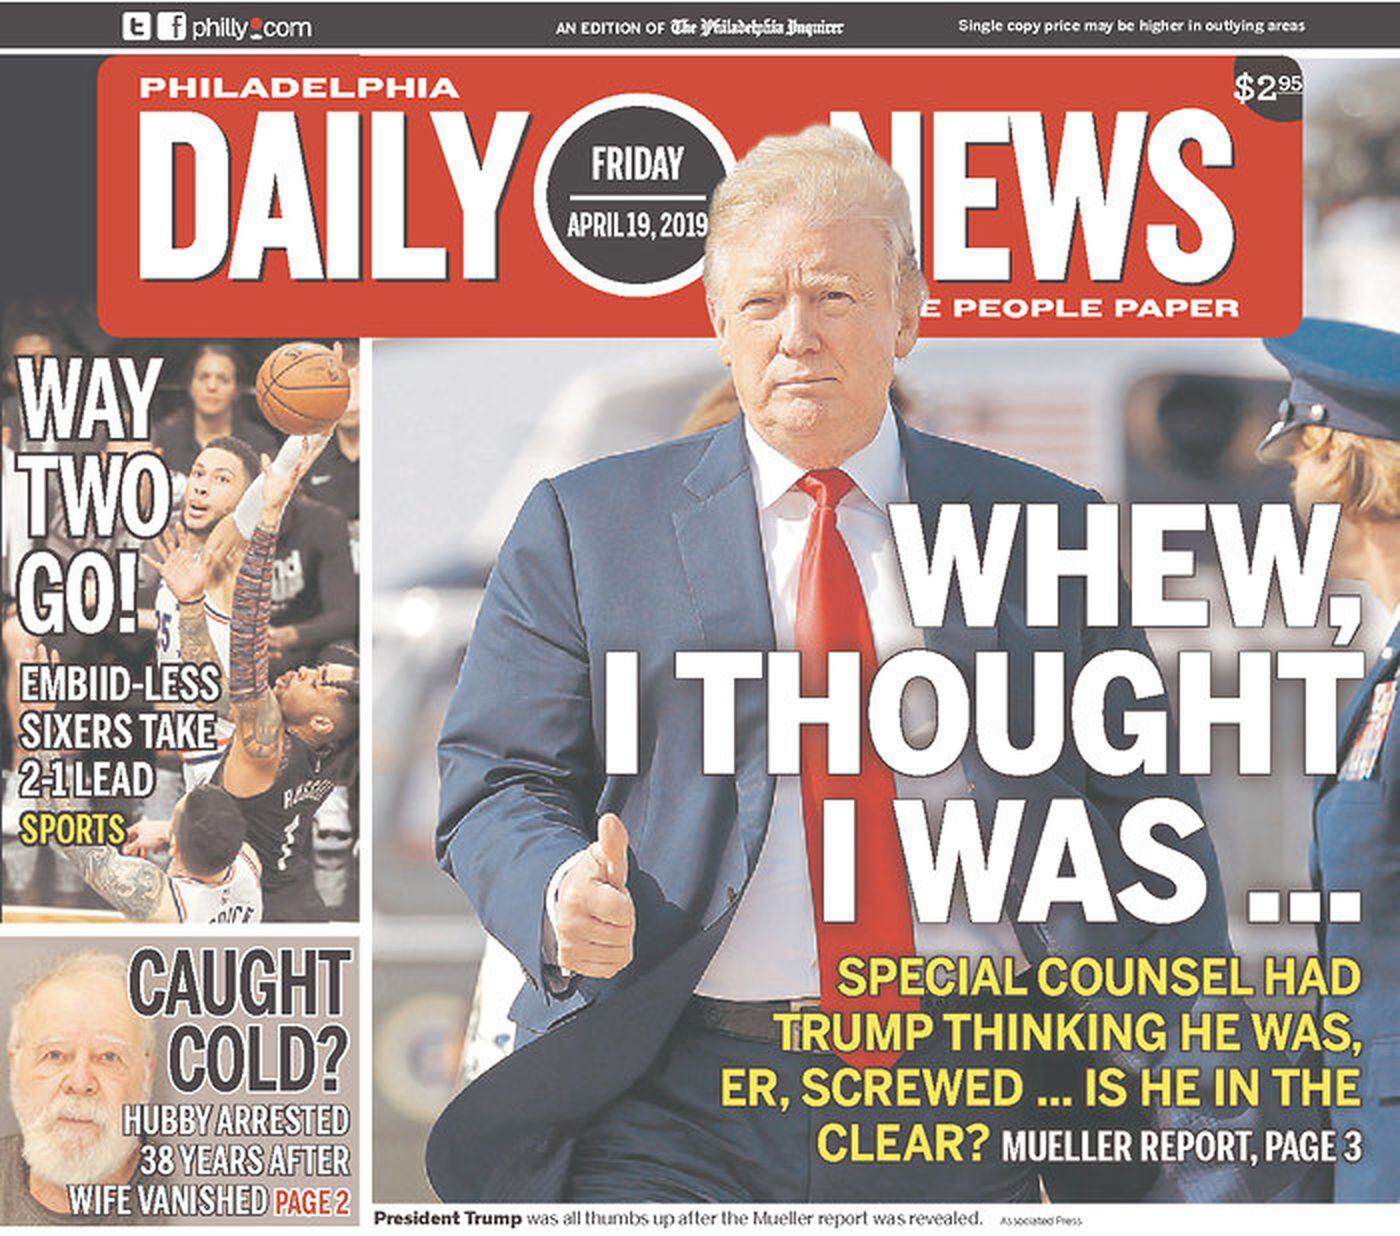 Mueller report front pages Big story, different takes